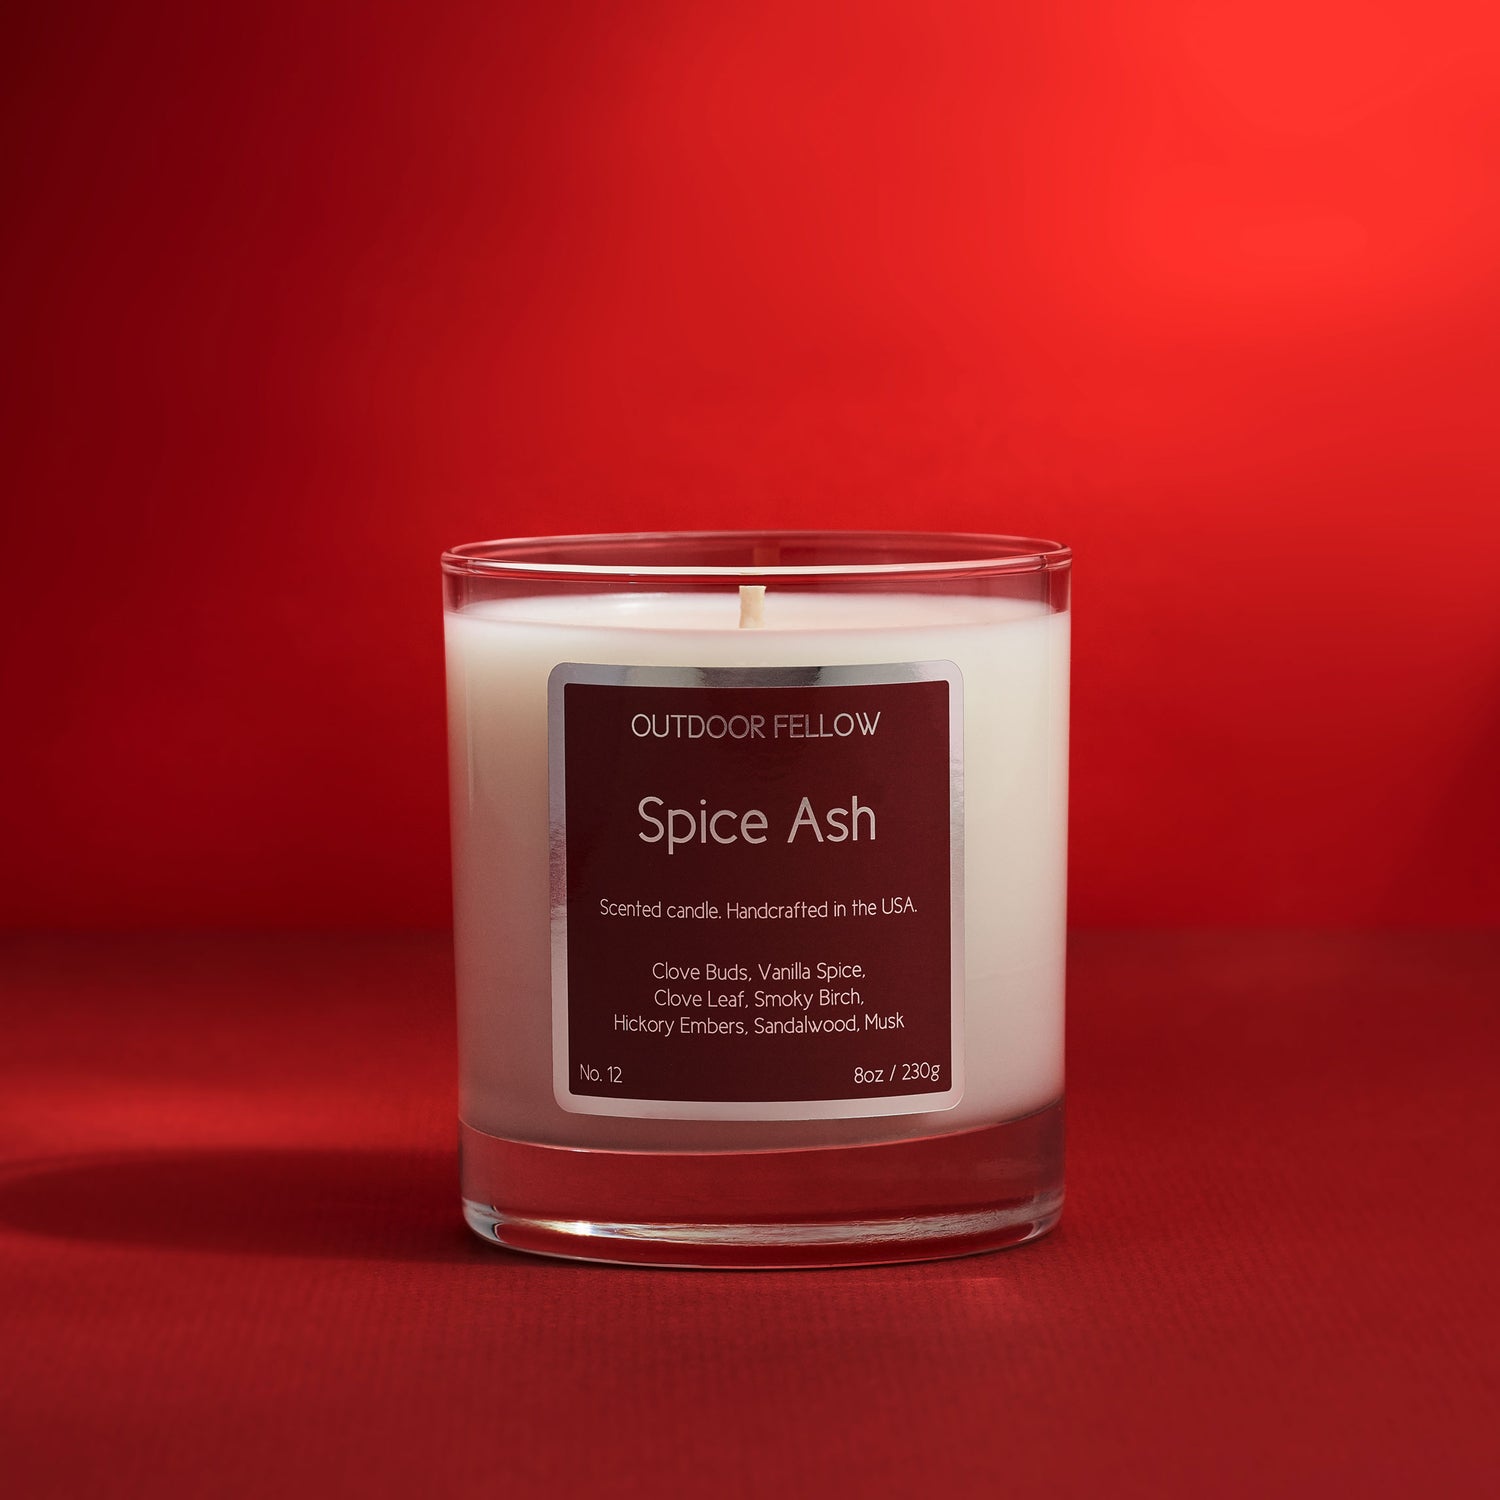 Spice Ash scented candle on a red background